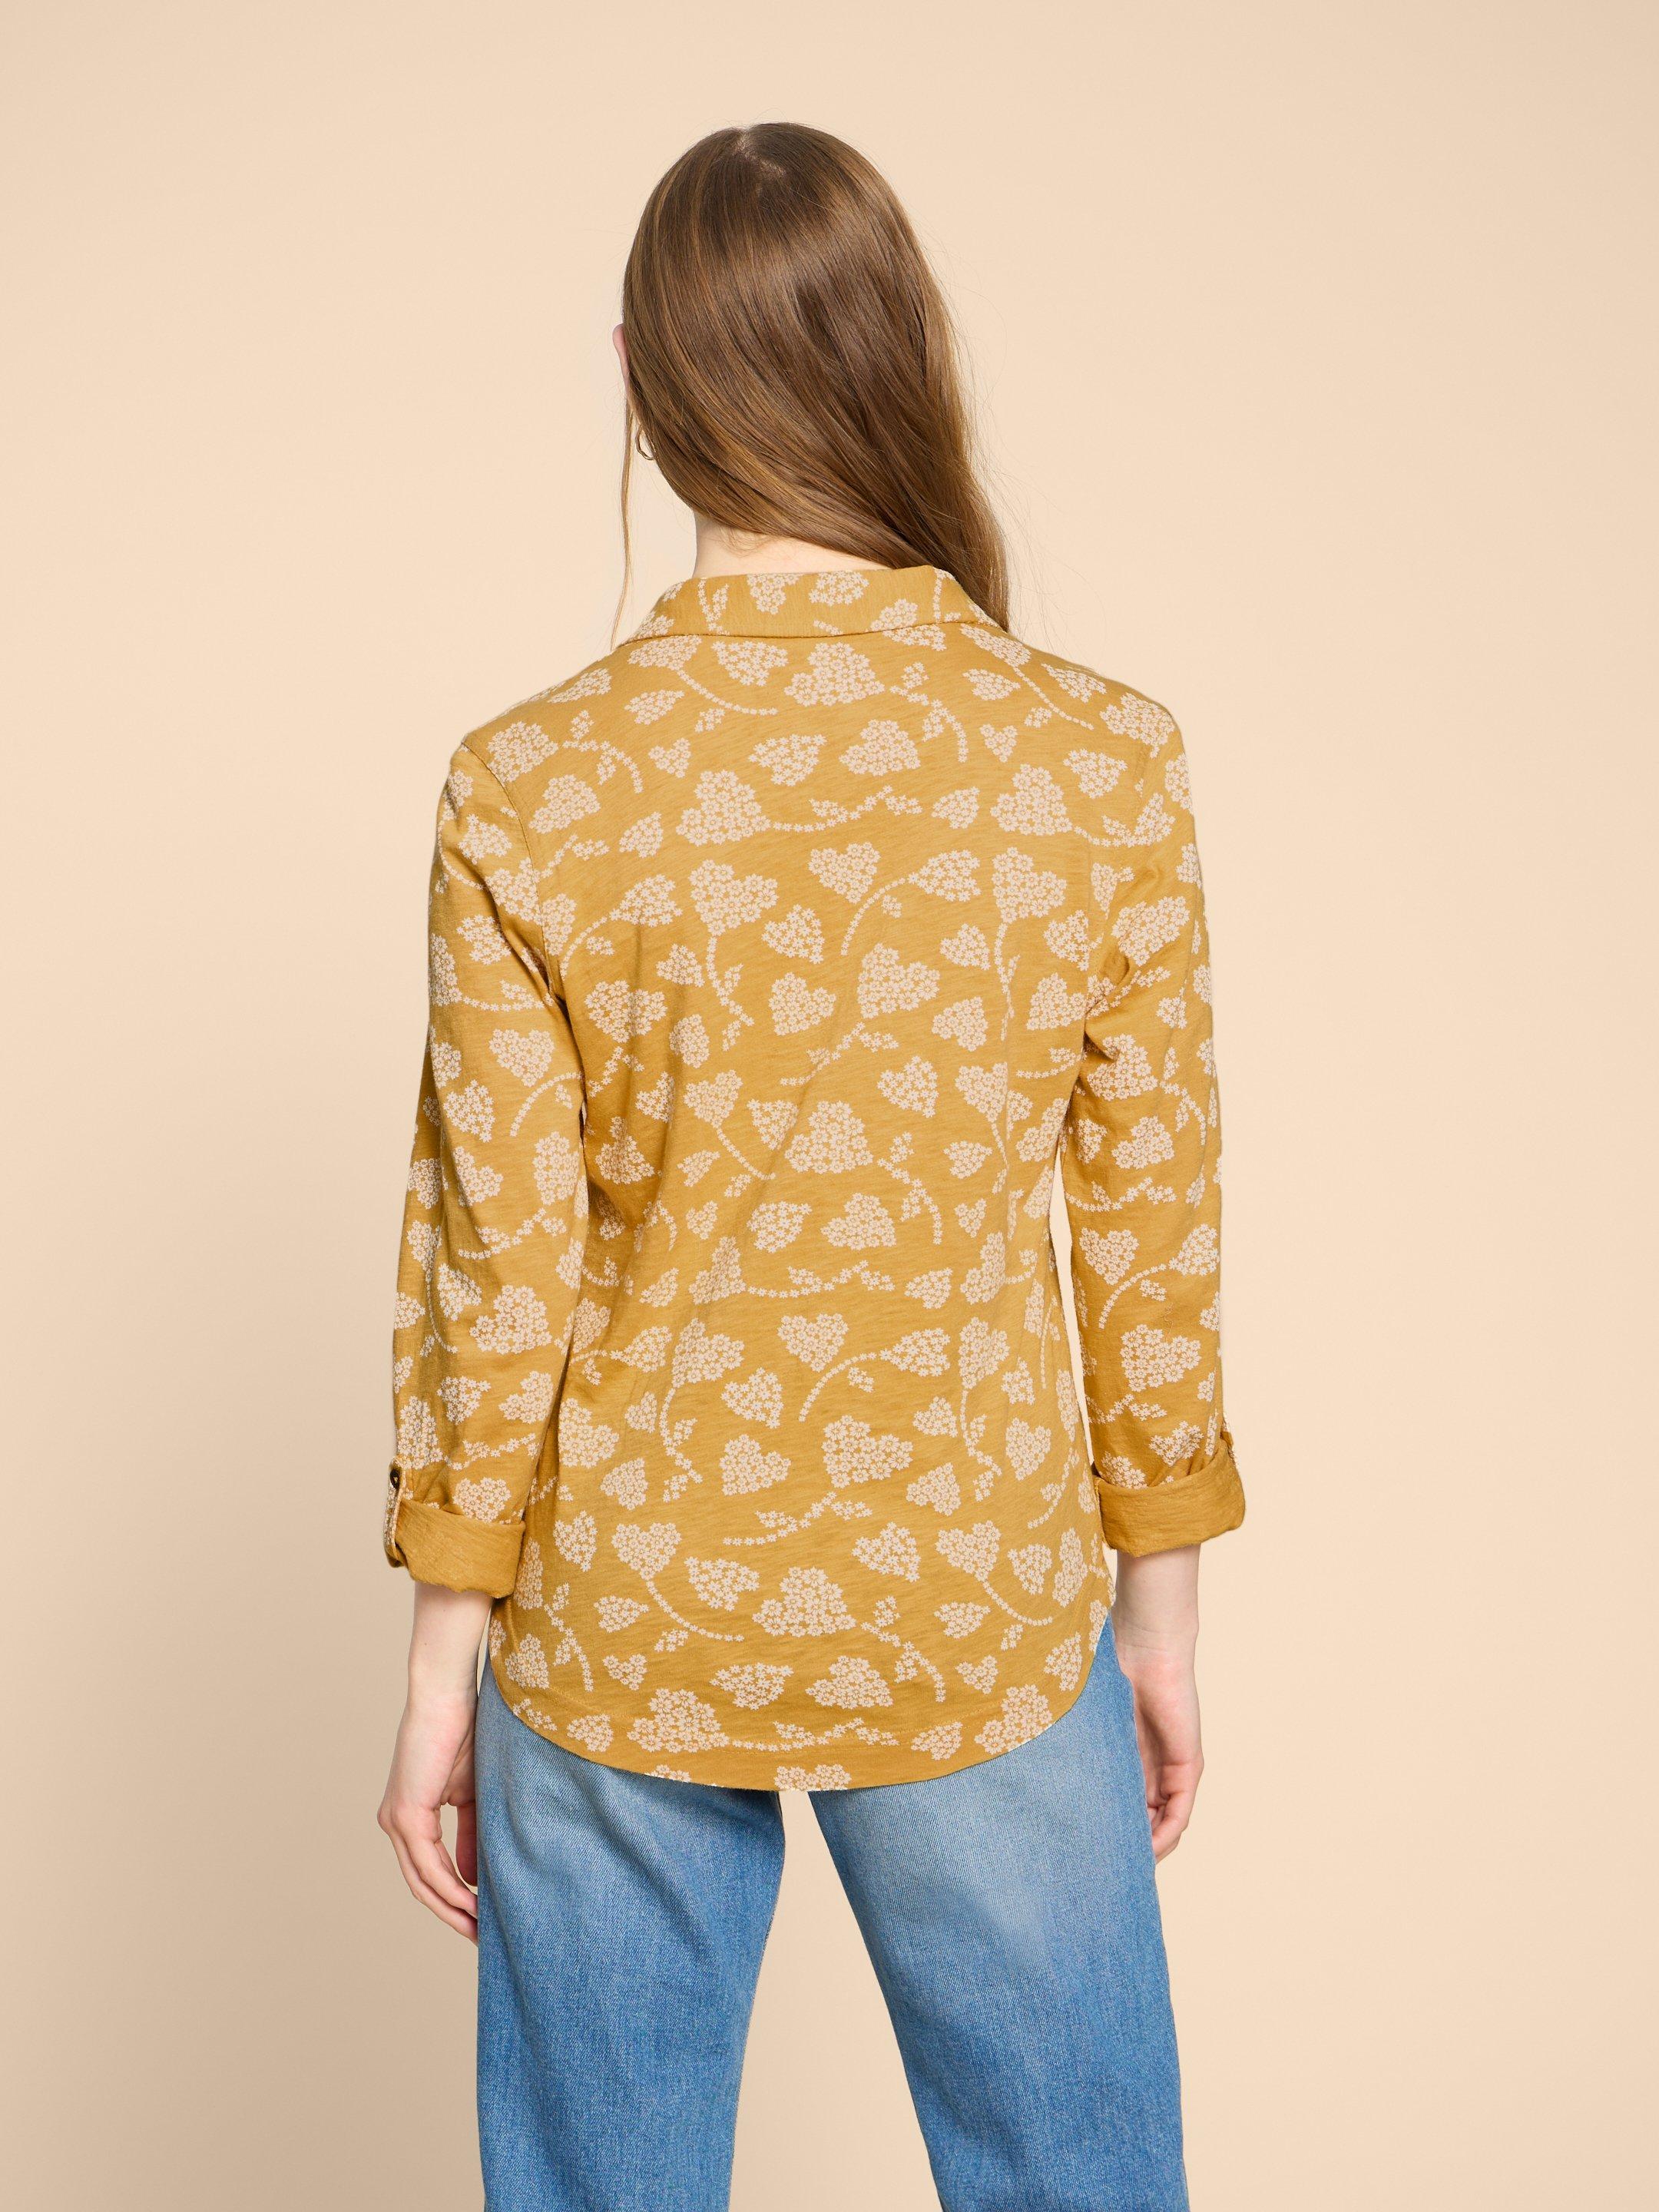 ANNIE JERSEY PRINT SHIRT in YELLOW PR - MODEL BACK